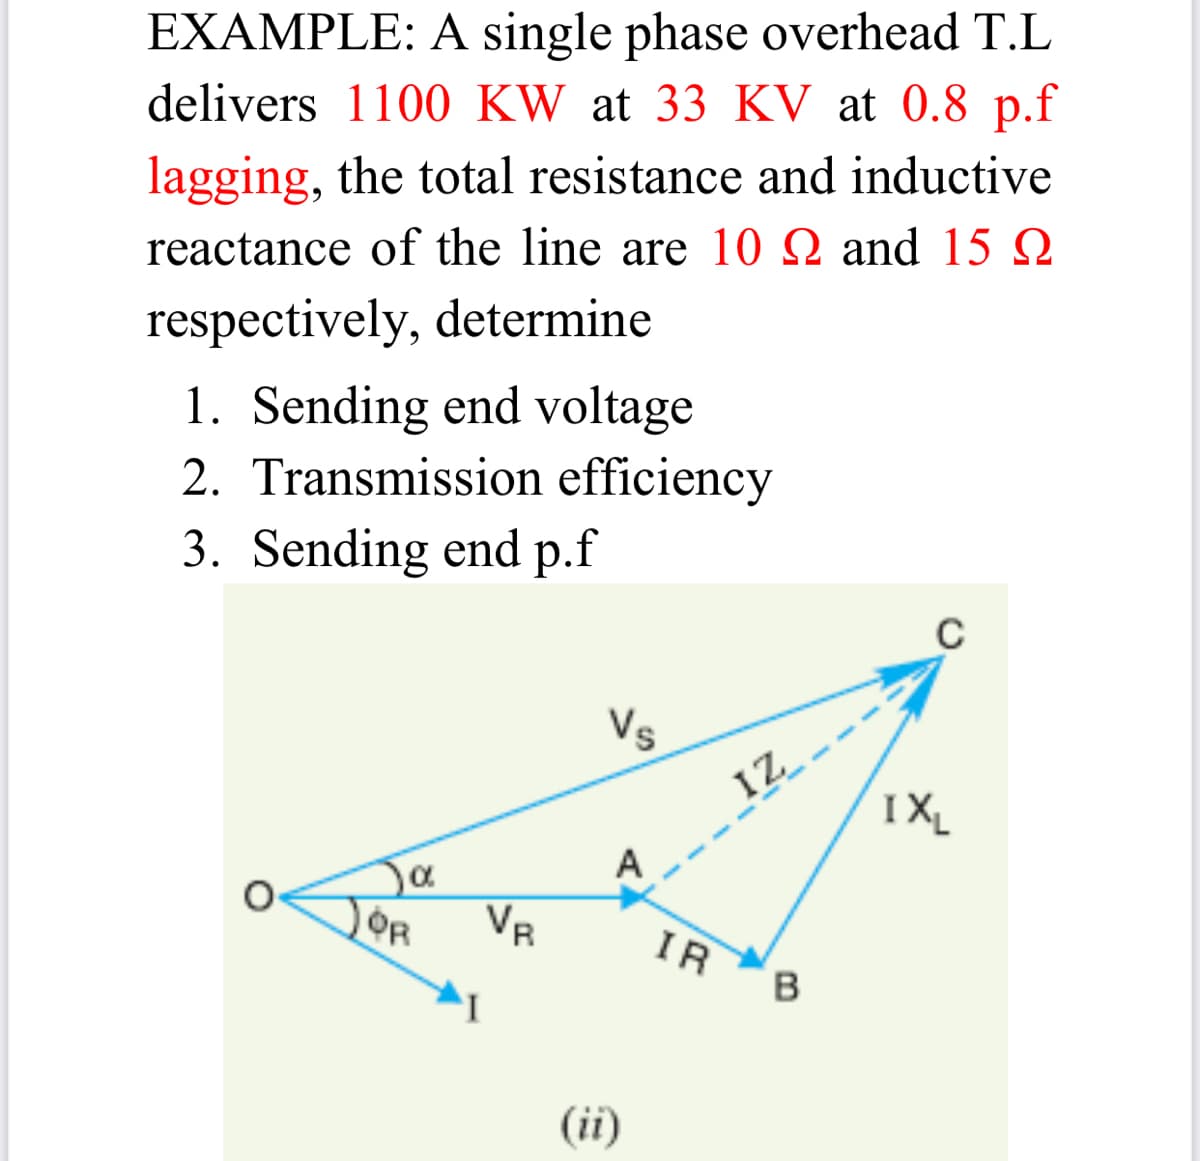 EXAMPLE: A single phase overhead T.L
delivers 1100 KW at 33 KV at 0.8 p.f
lagging, the total resistance and inductive
reactance of the line are 10 N and 15 N
respectively, determine
1. Sending end voltage
2. Transmission efficiency
3. Sending end p.f
C
Vs
IZ.
IXL
A
VR
OR
IR
B
(ii)
